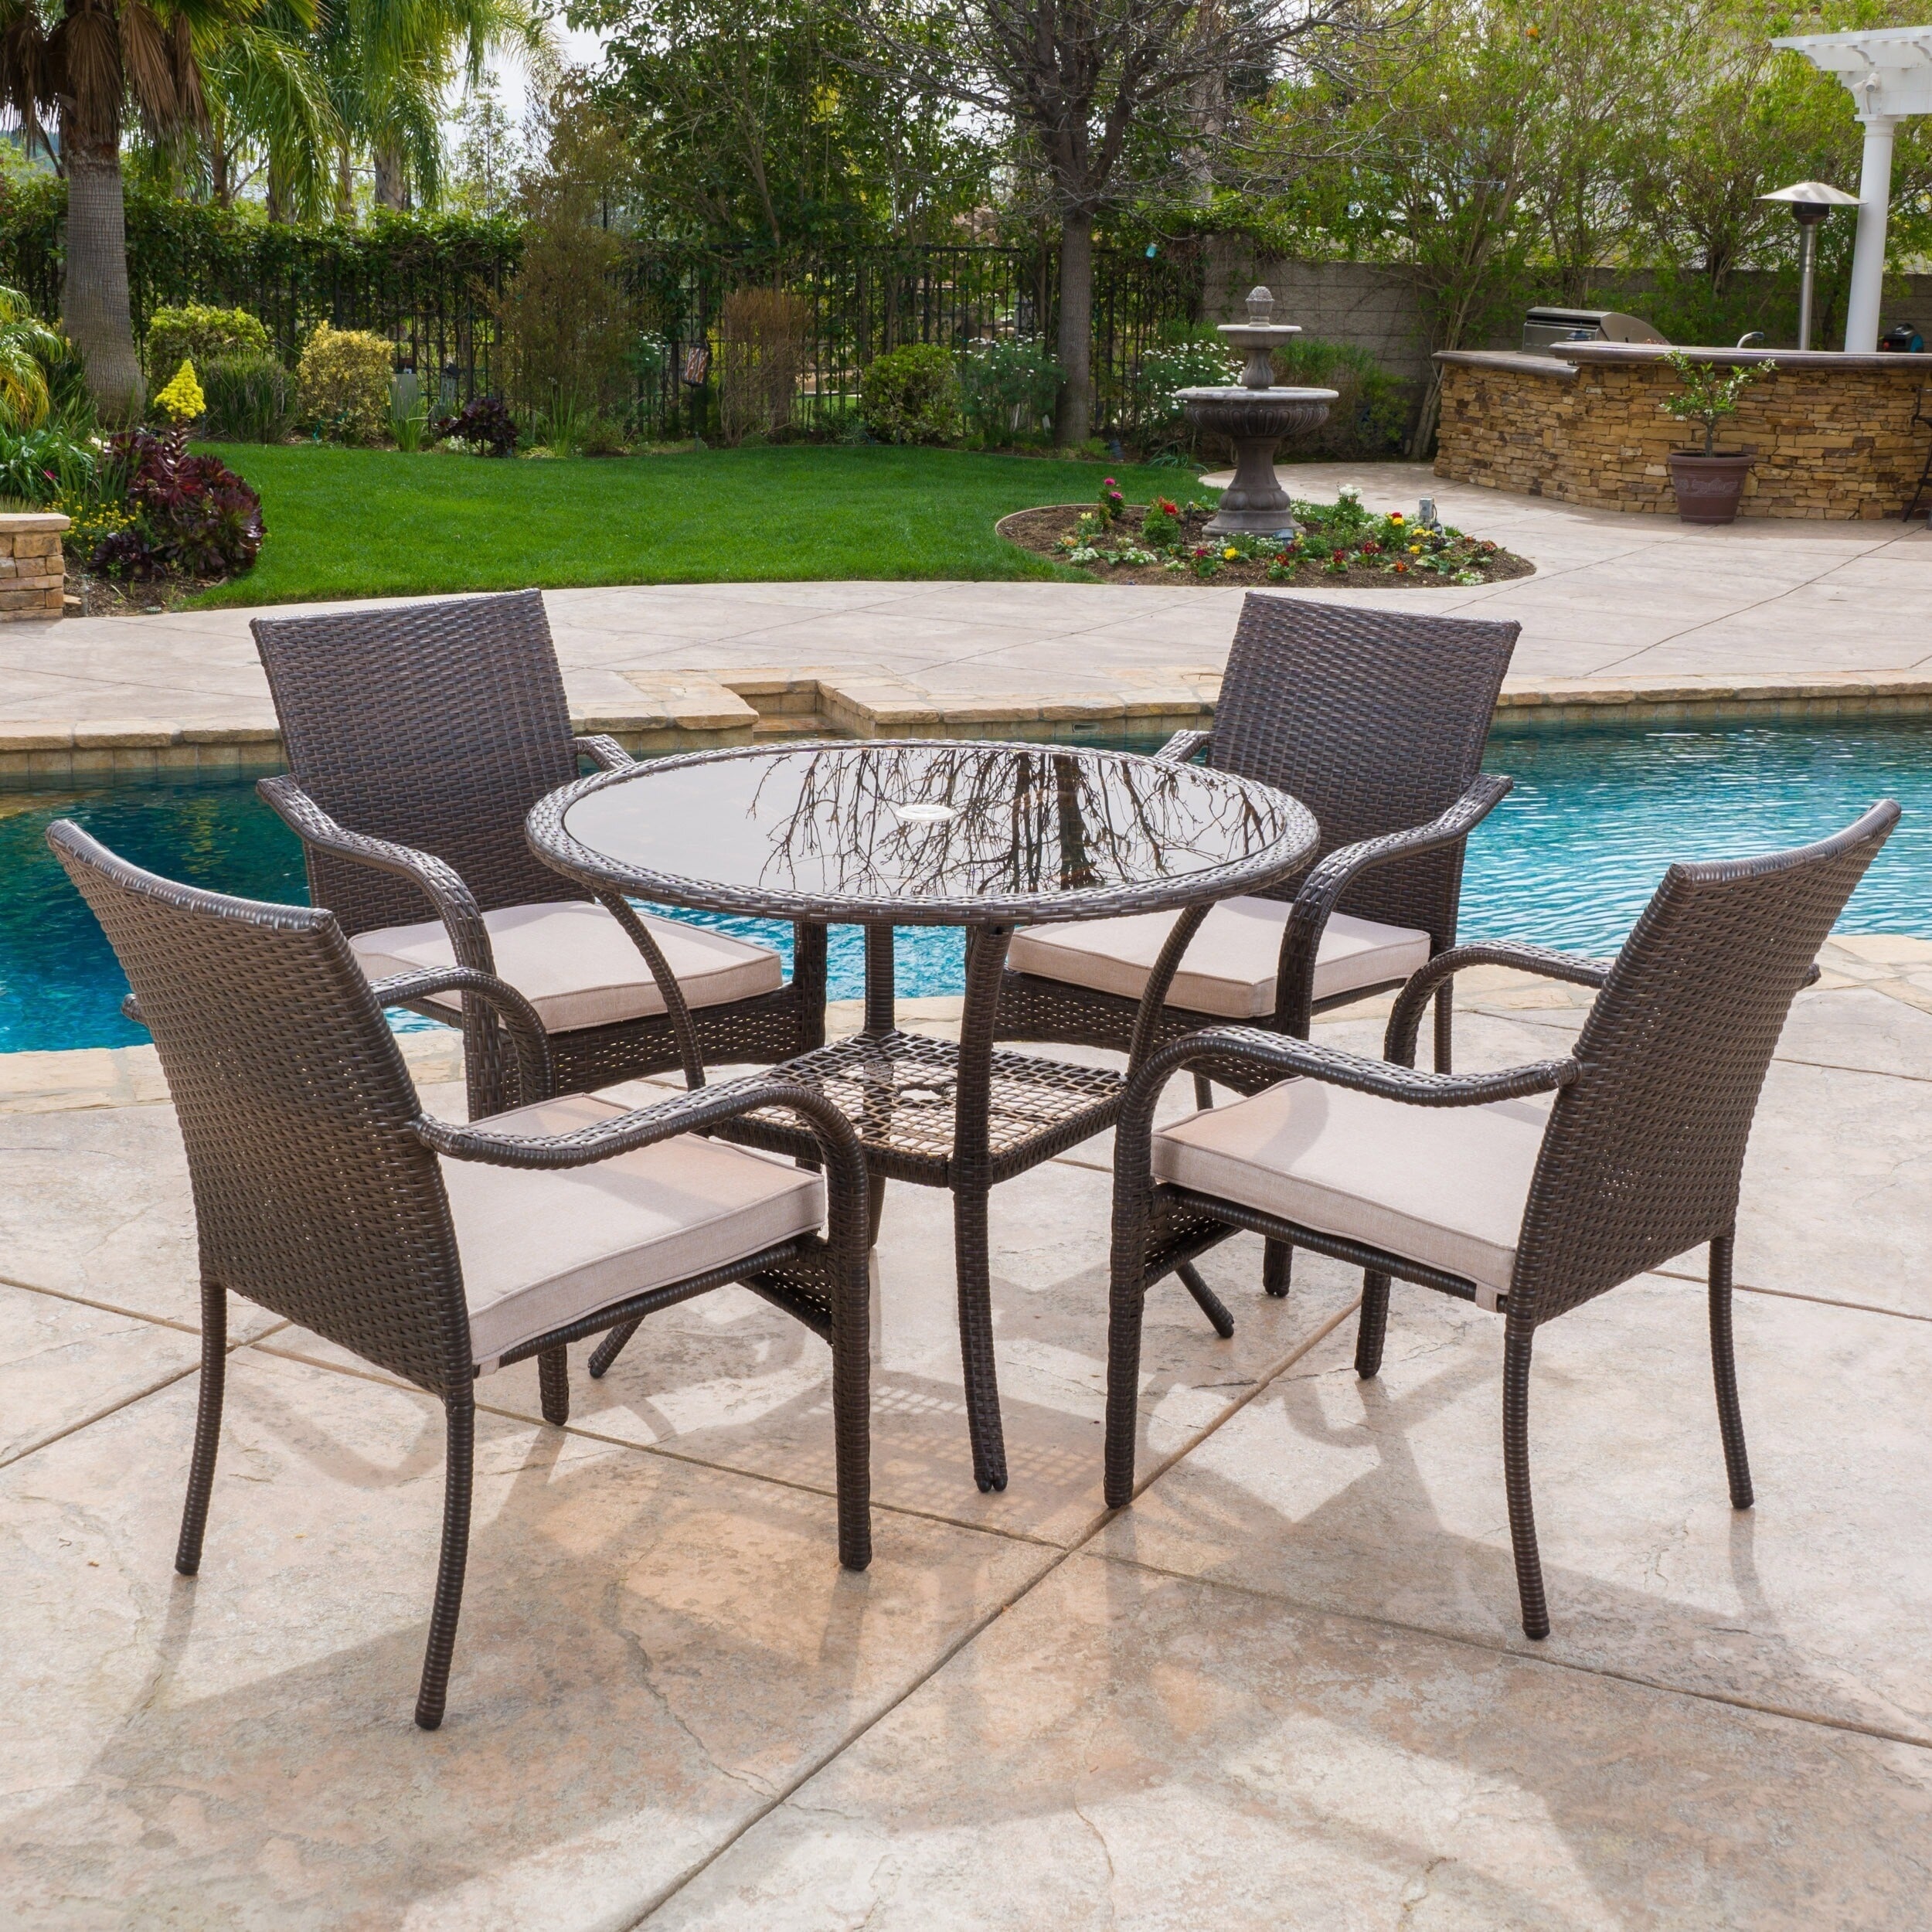 Textured Beige Multibrown Christopher Knight Home San Pico Outdoor Wicker Armed Dining Chairs with Water Resistant Cushions 4-Pcs Set 